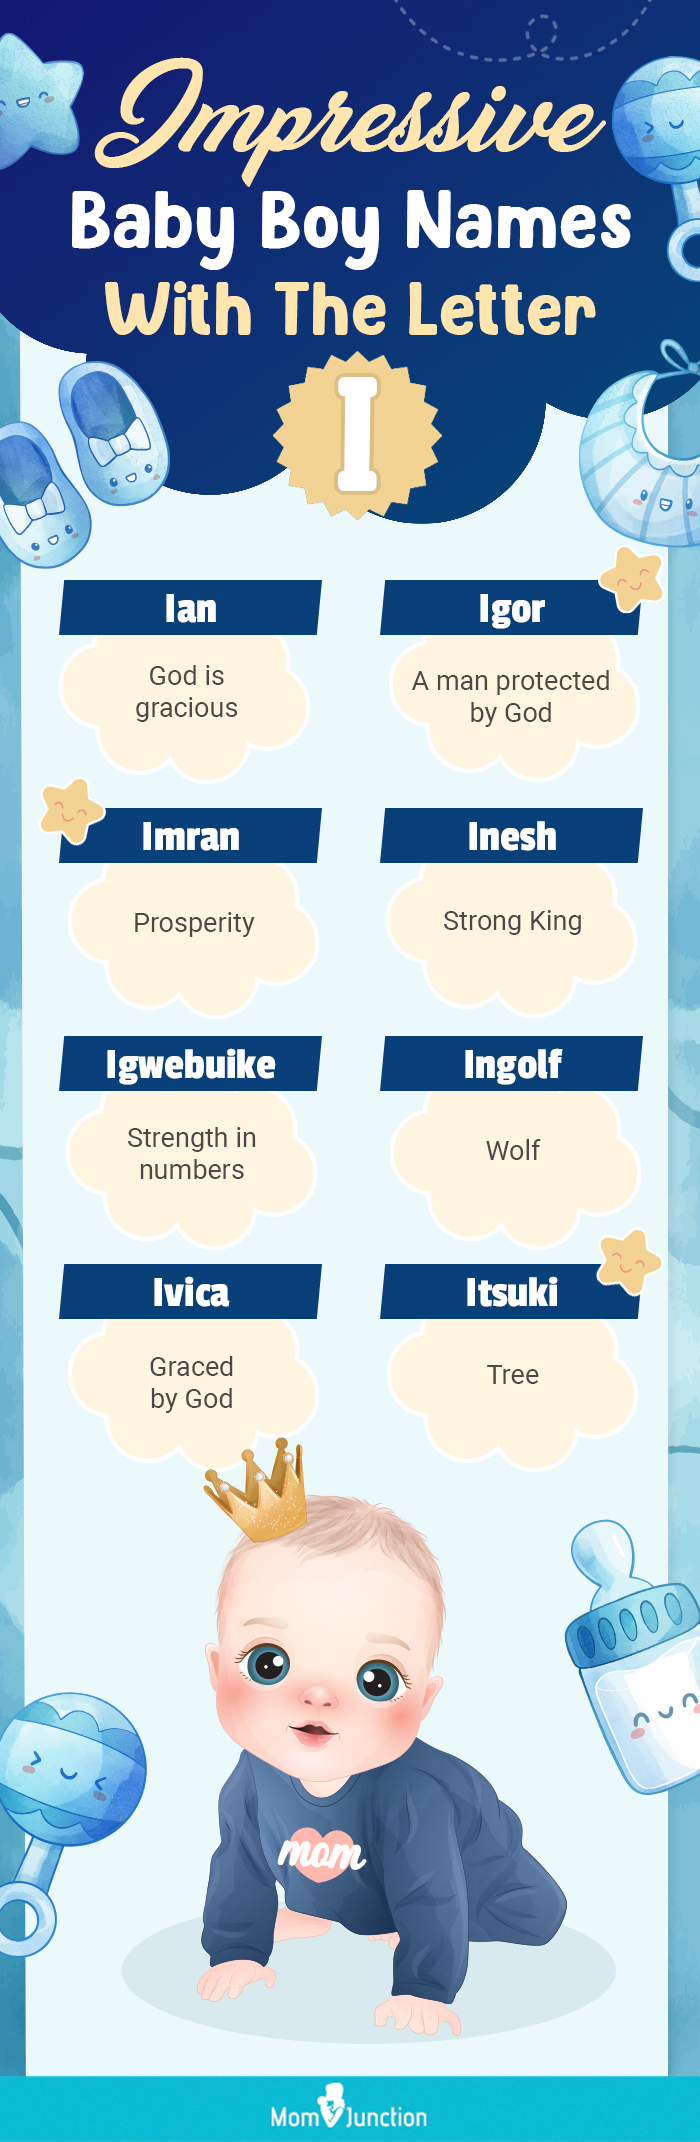  impressive baby boy names with the letter i(infographic)